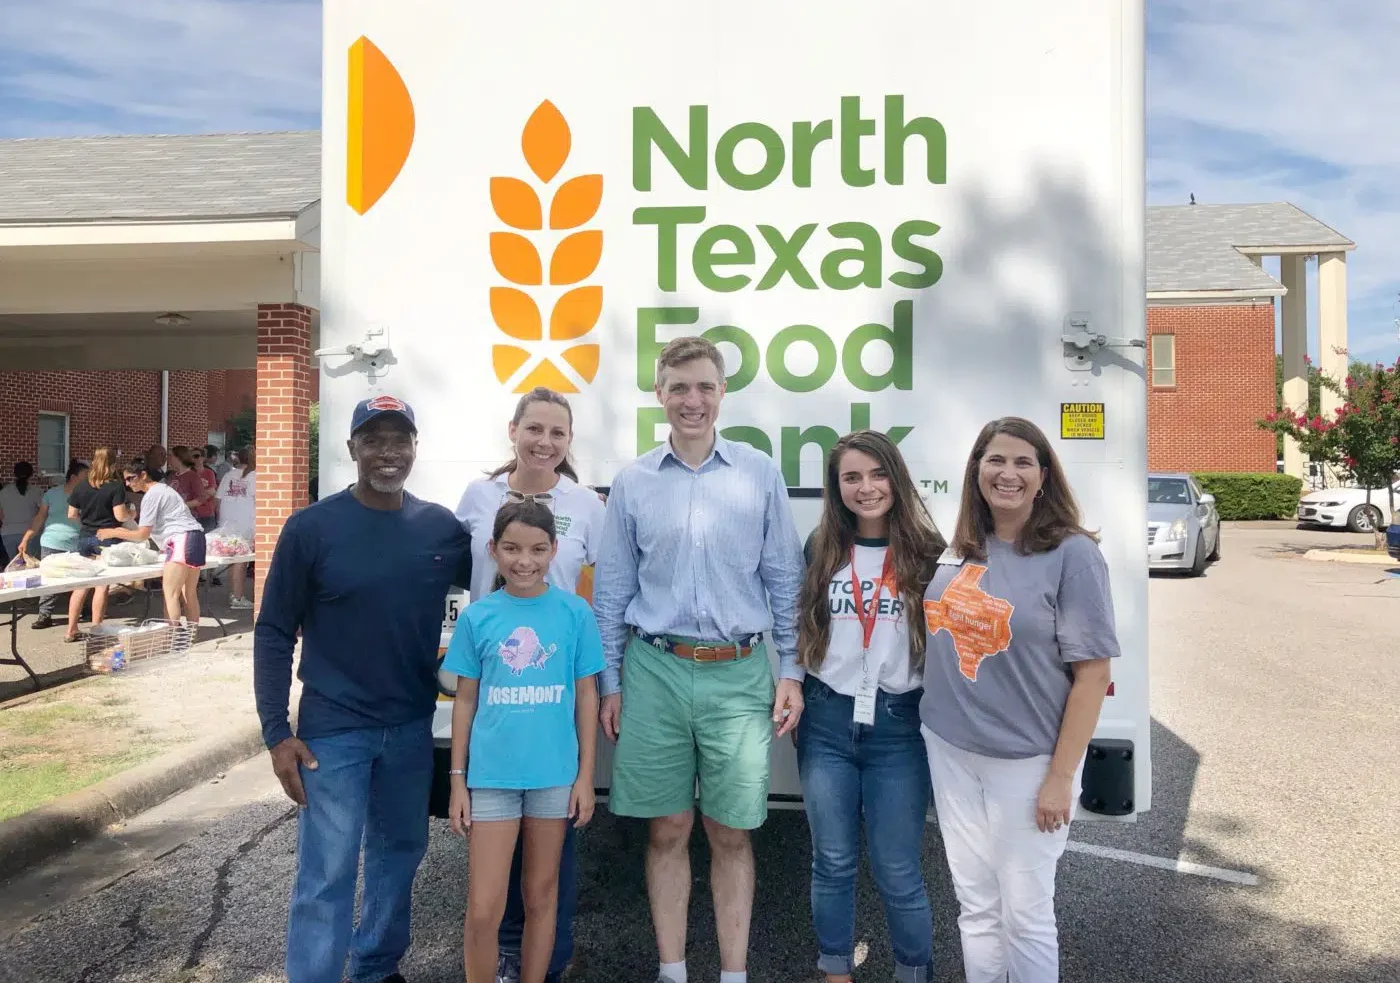 Group of people in front of a North Texas Food Bank sign